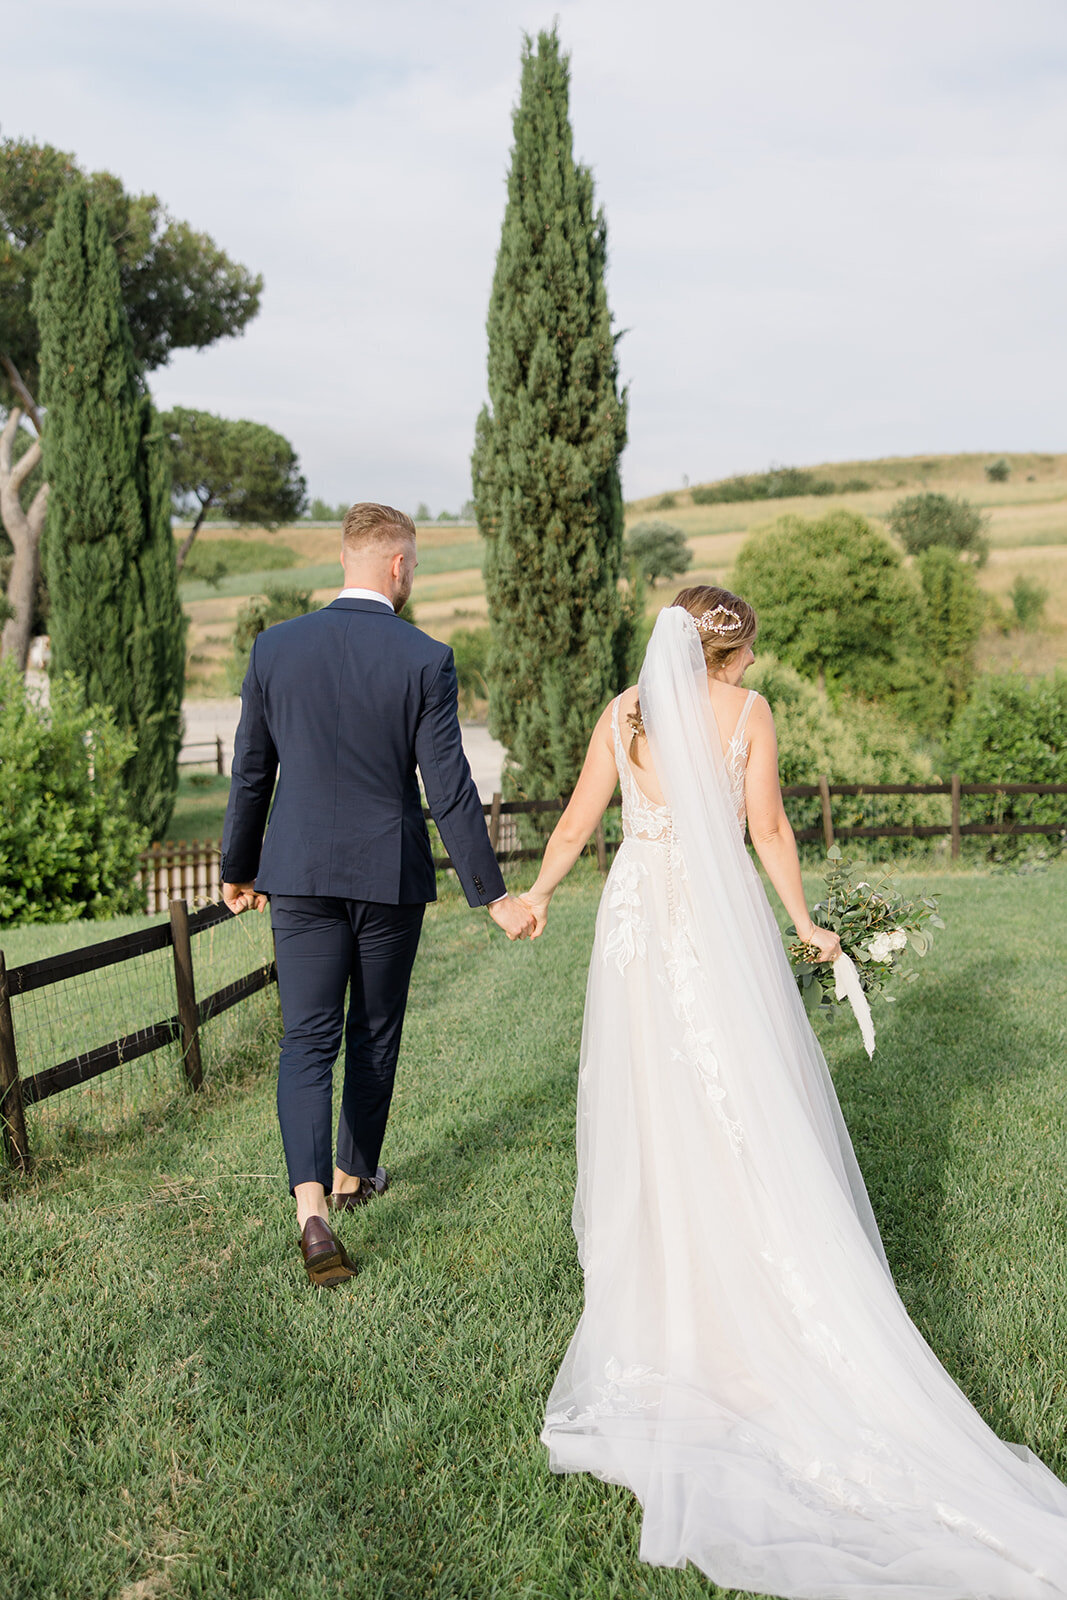 Rome_Italy_Wedding_BrittanyNavinPhotography-374